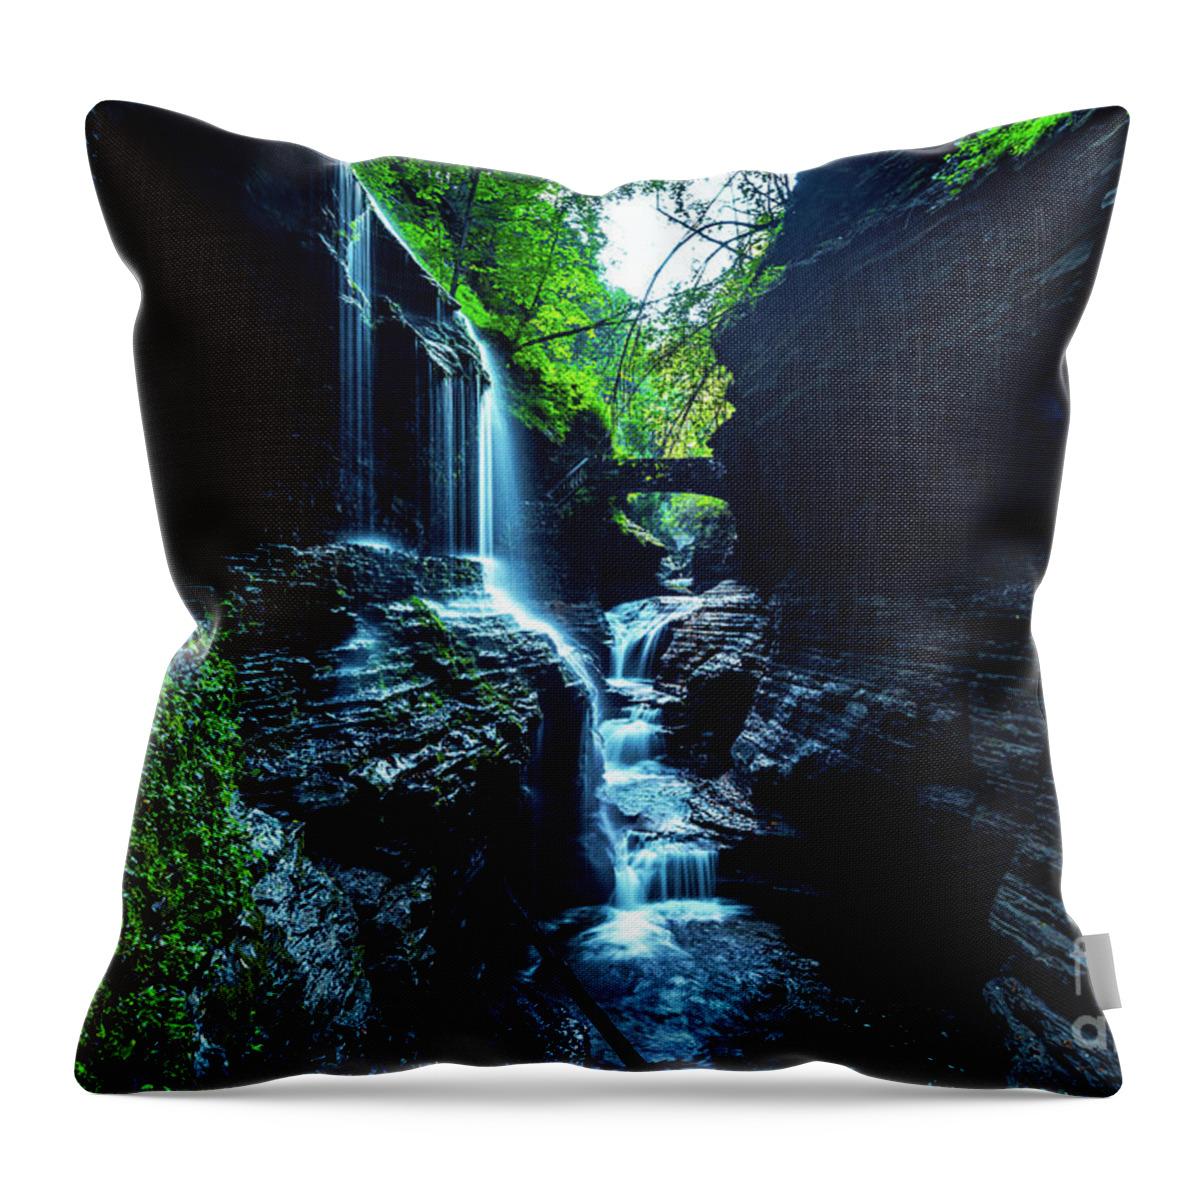 2018 Throw Pillow featuring the photograph Water and Rock by Stef Ko